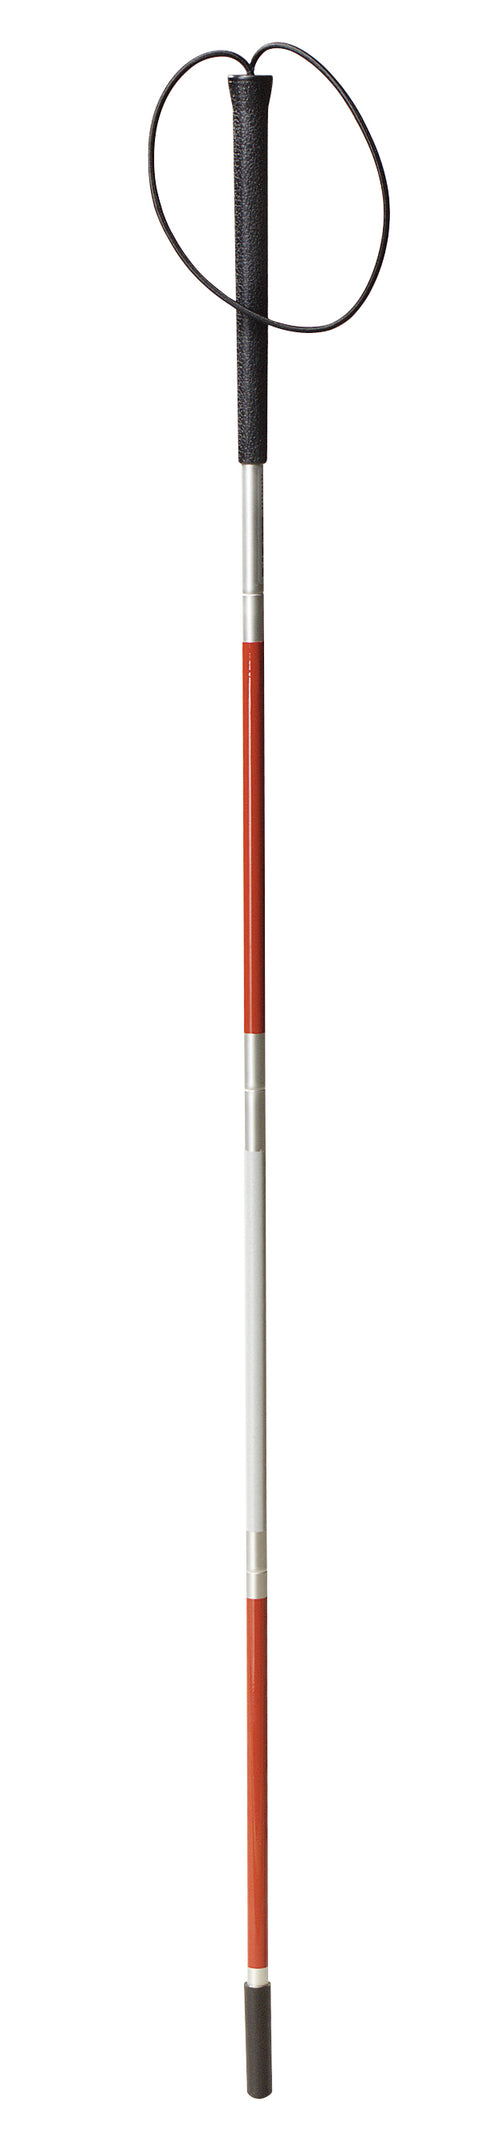 Drive Medical 10352-1 Folding Blind Cane with Wrist Strap